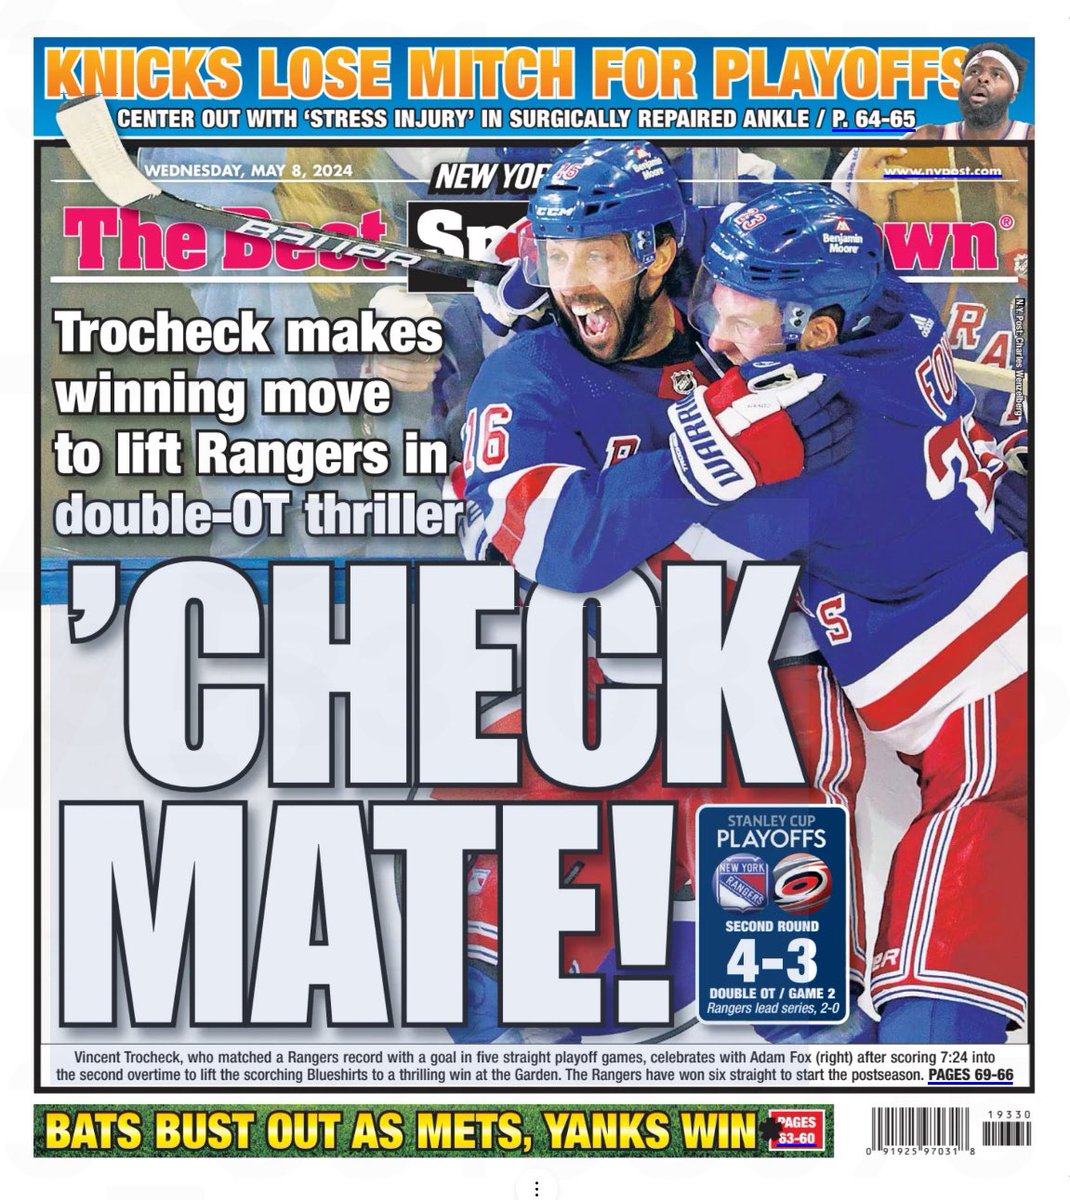 #NYR take the back page of today’s @nypost ⬇️